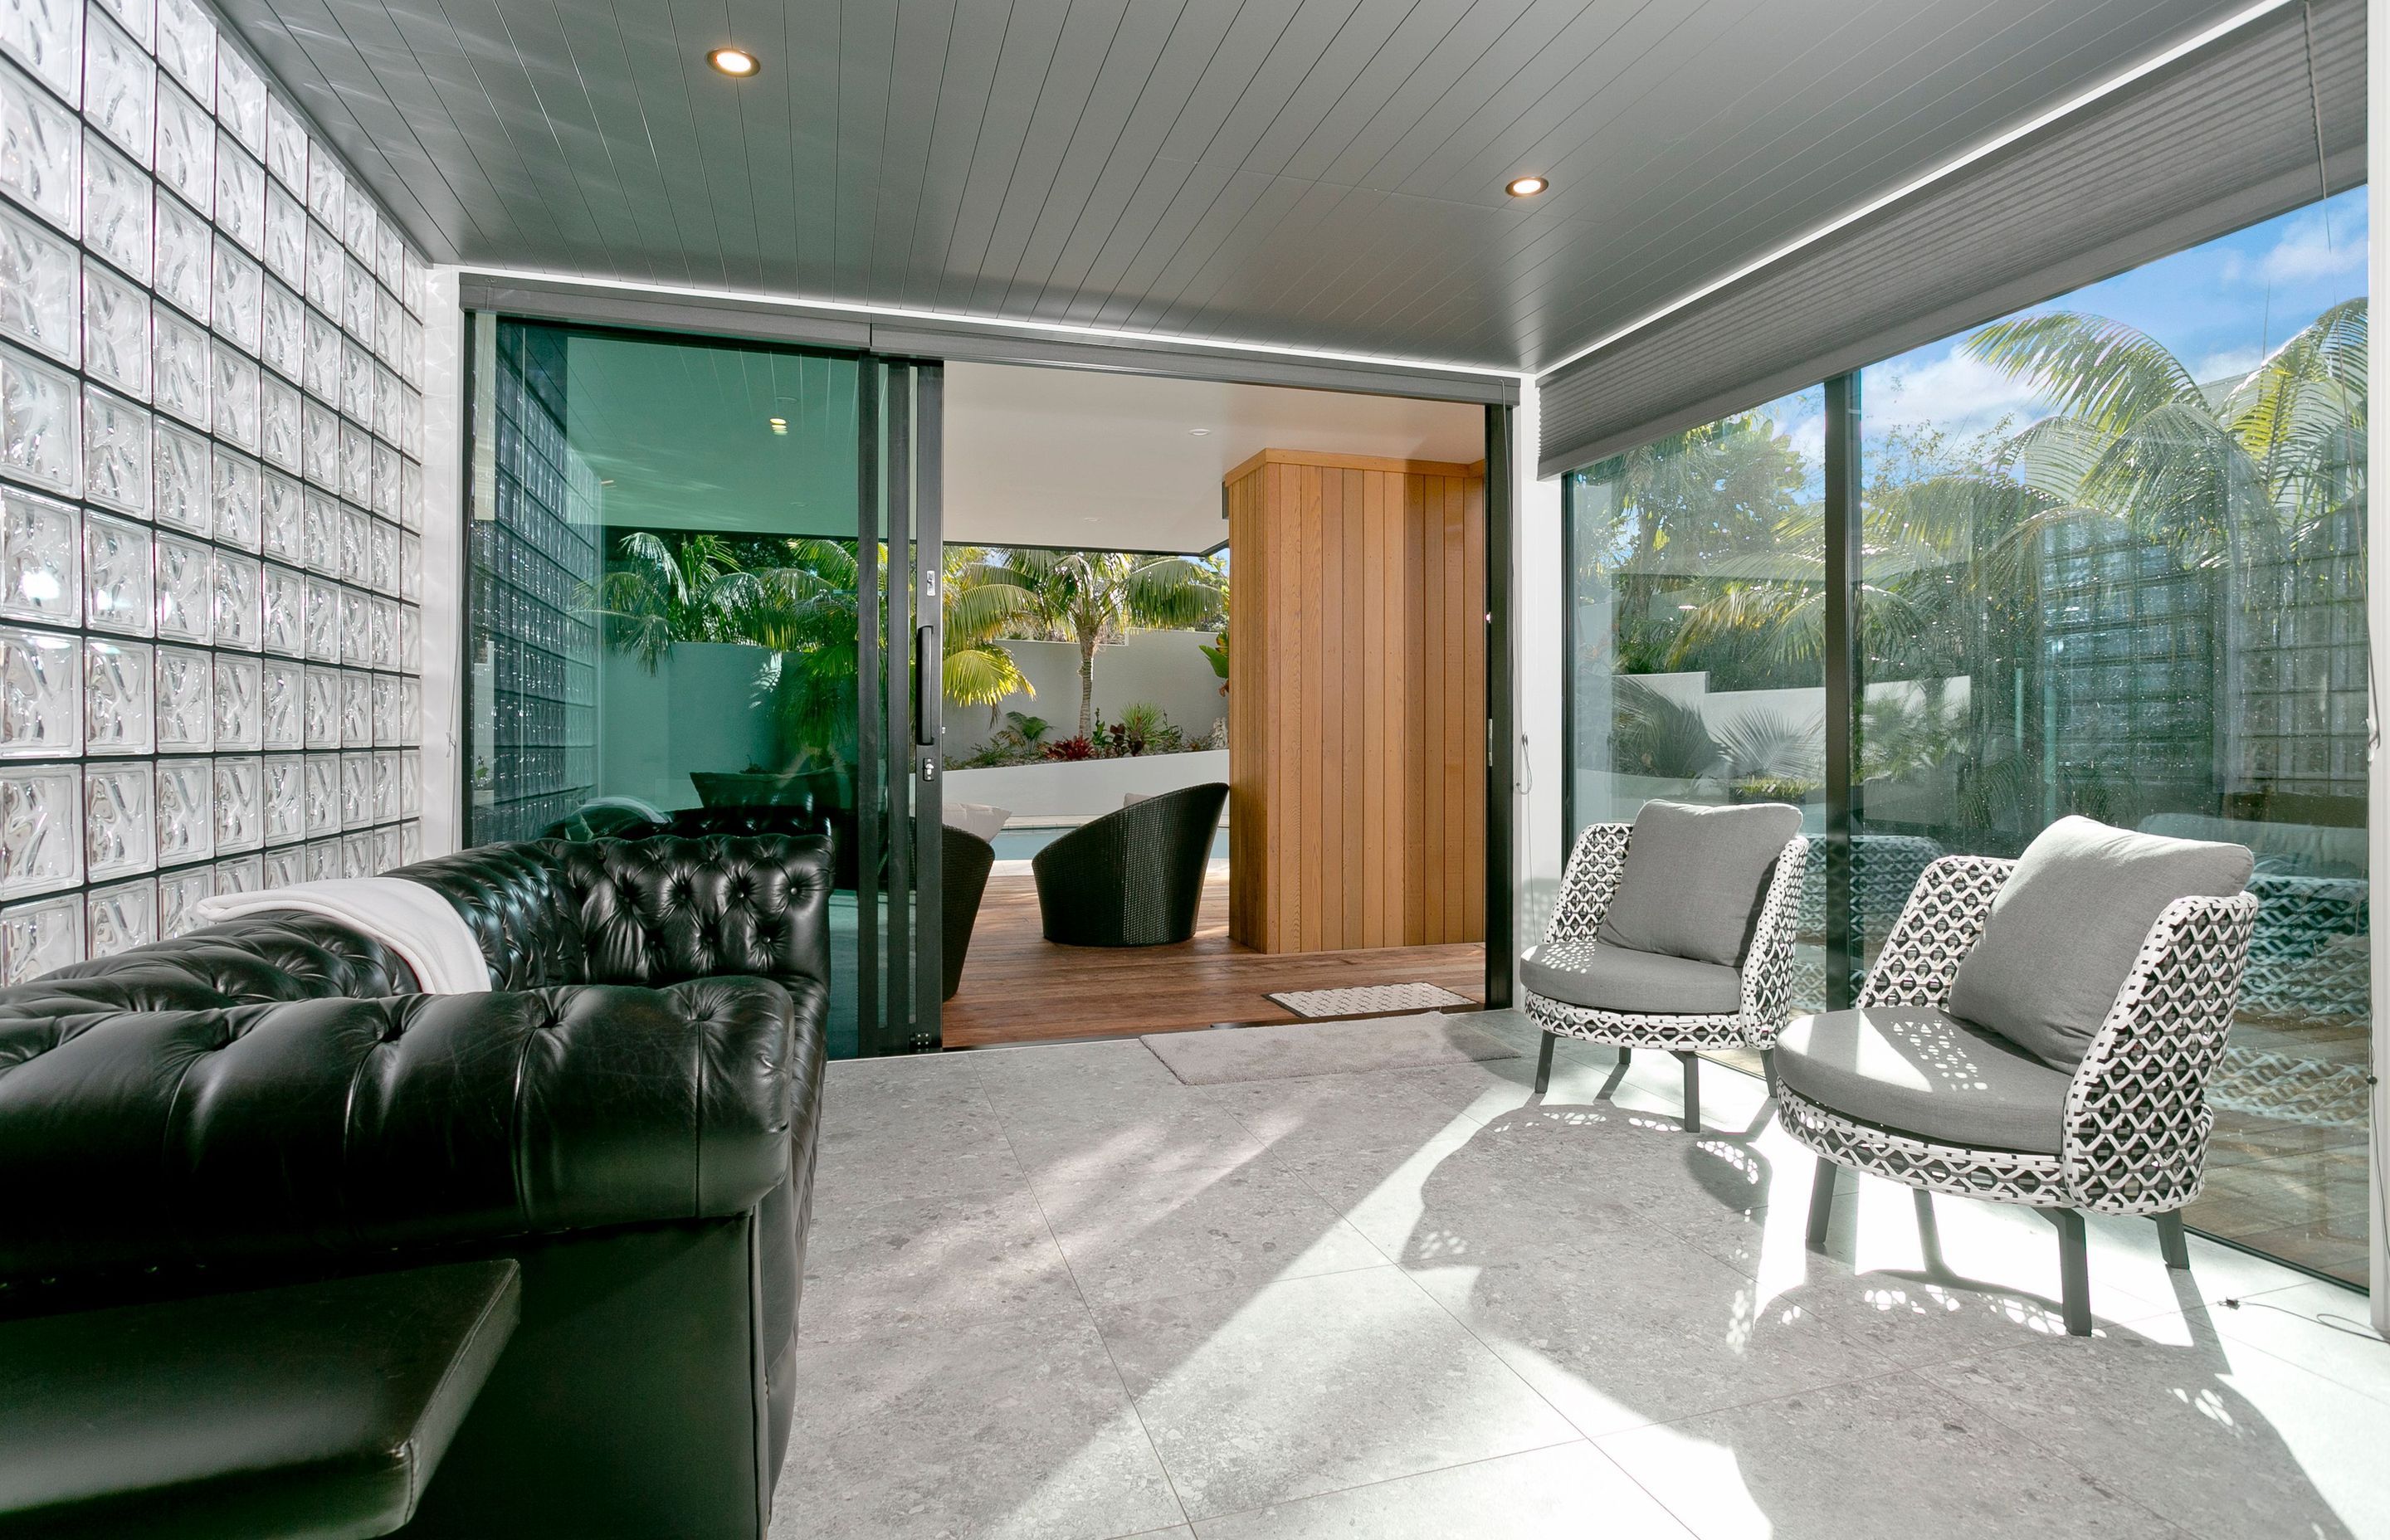 Off the entrance foyer, a further living area leads onto the refurbished deck area and swimming pool.